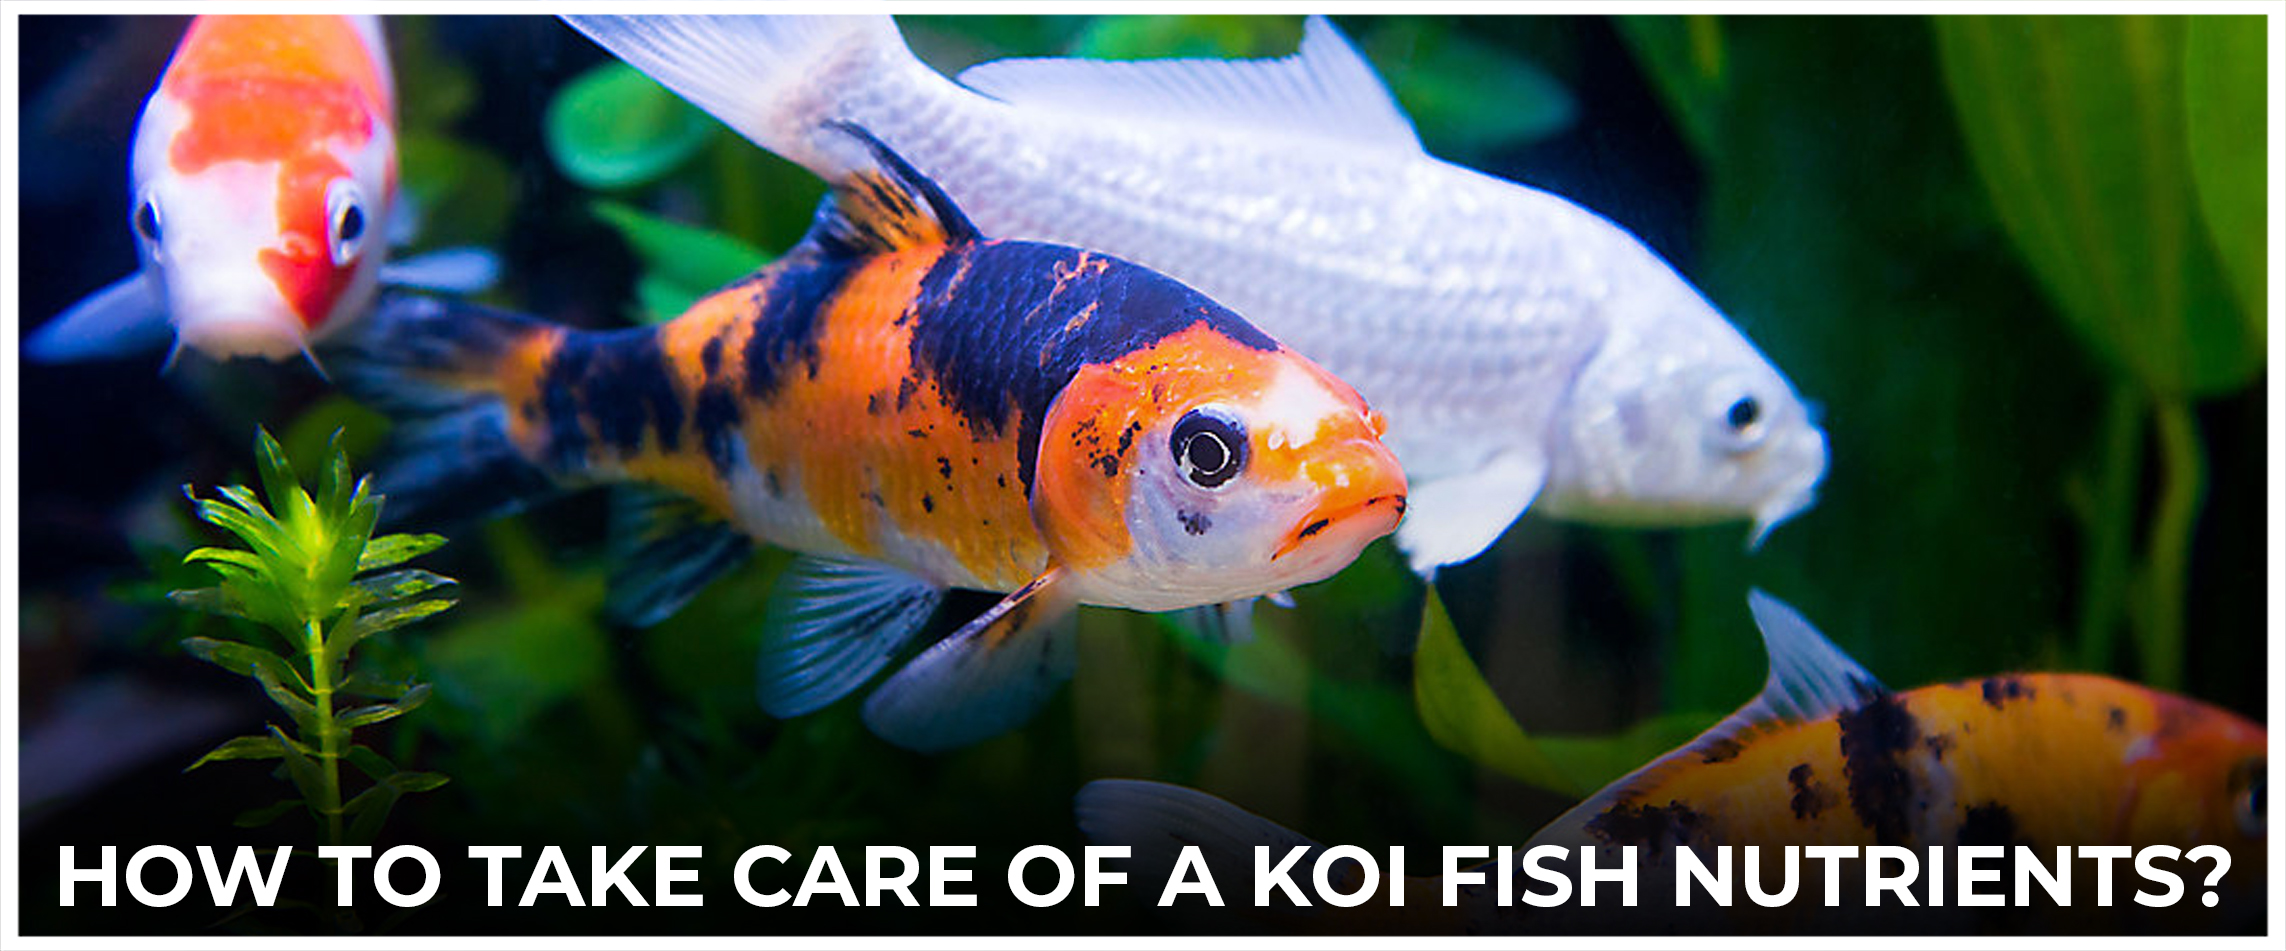 How To Take Care Of A Koi Fish Nutrients